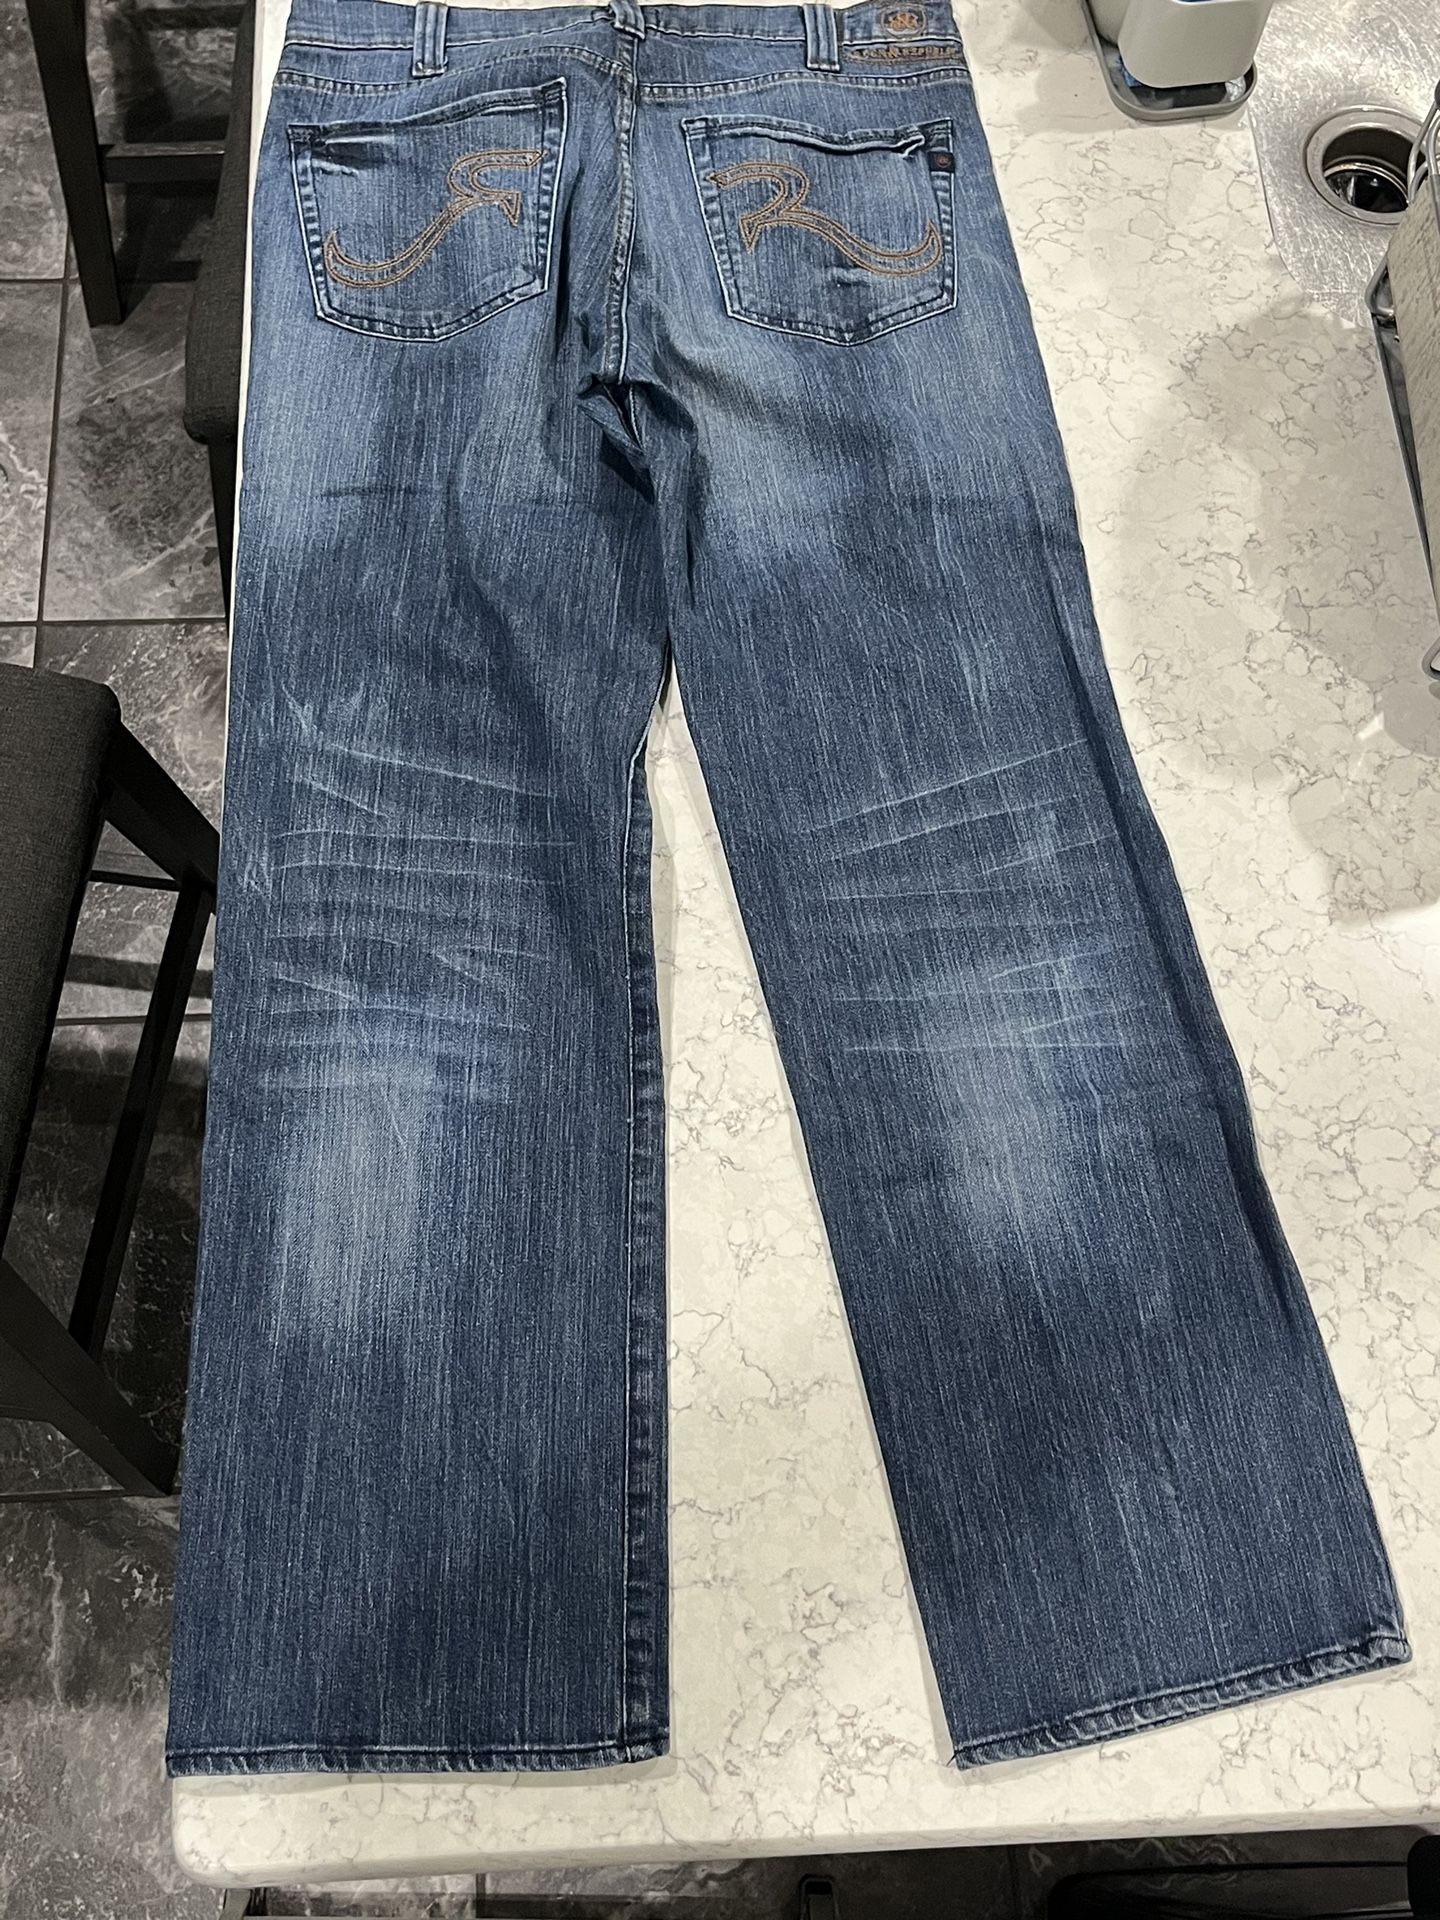 Gently Worn Men’s ROCK AND REVIVAL JEANS 36x32